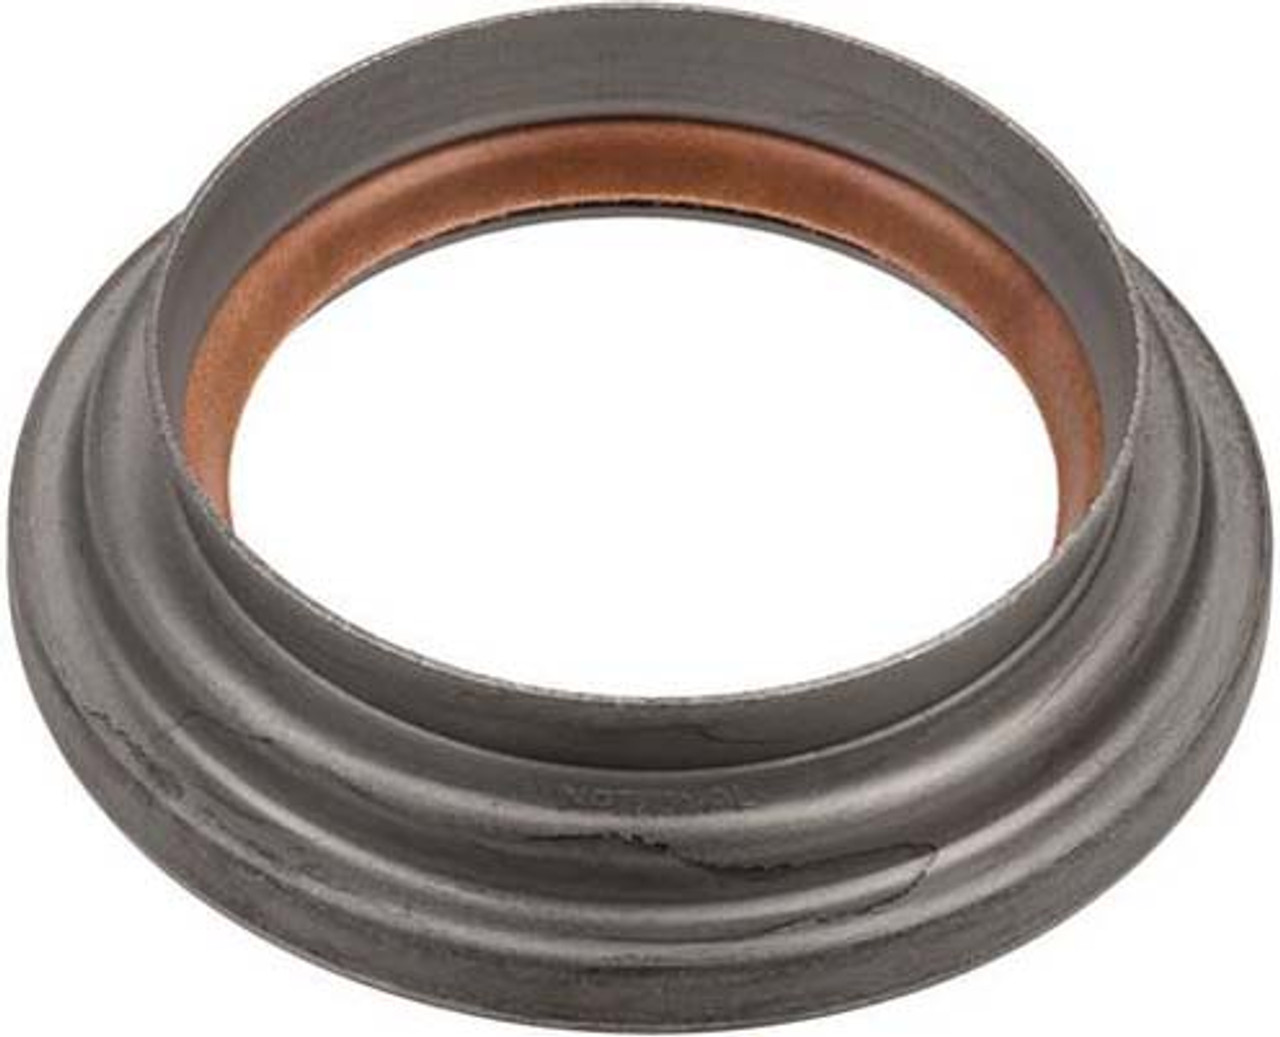 3.125" Inch Metal Leather Grease Seal - Specific Application  5751